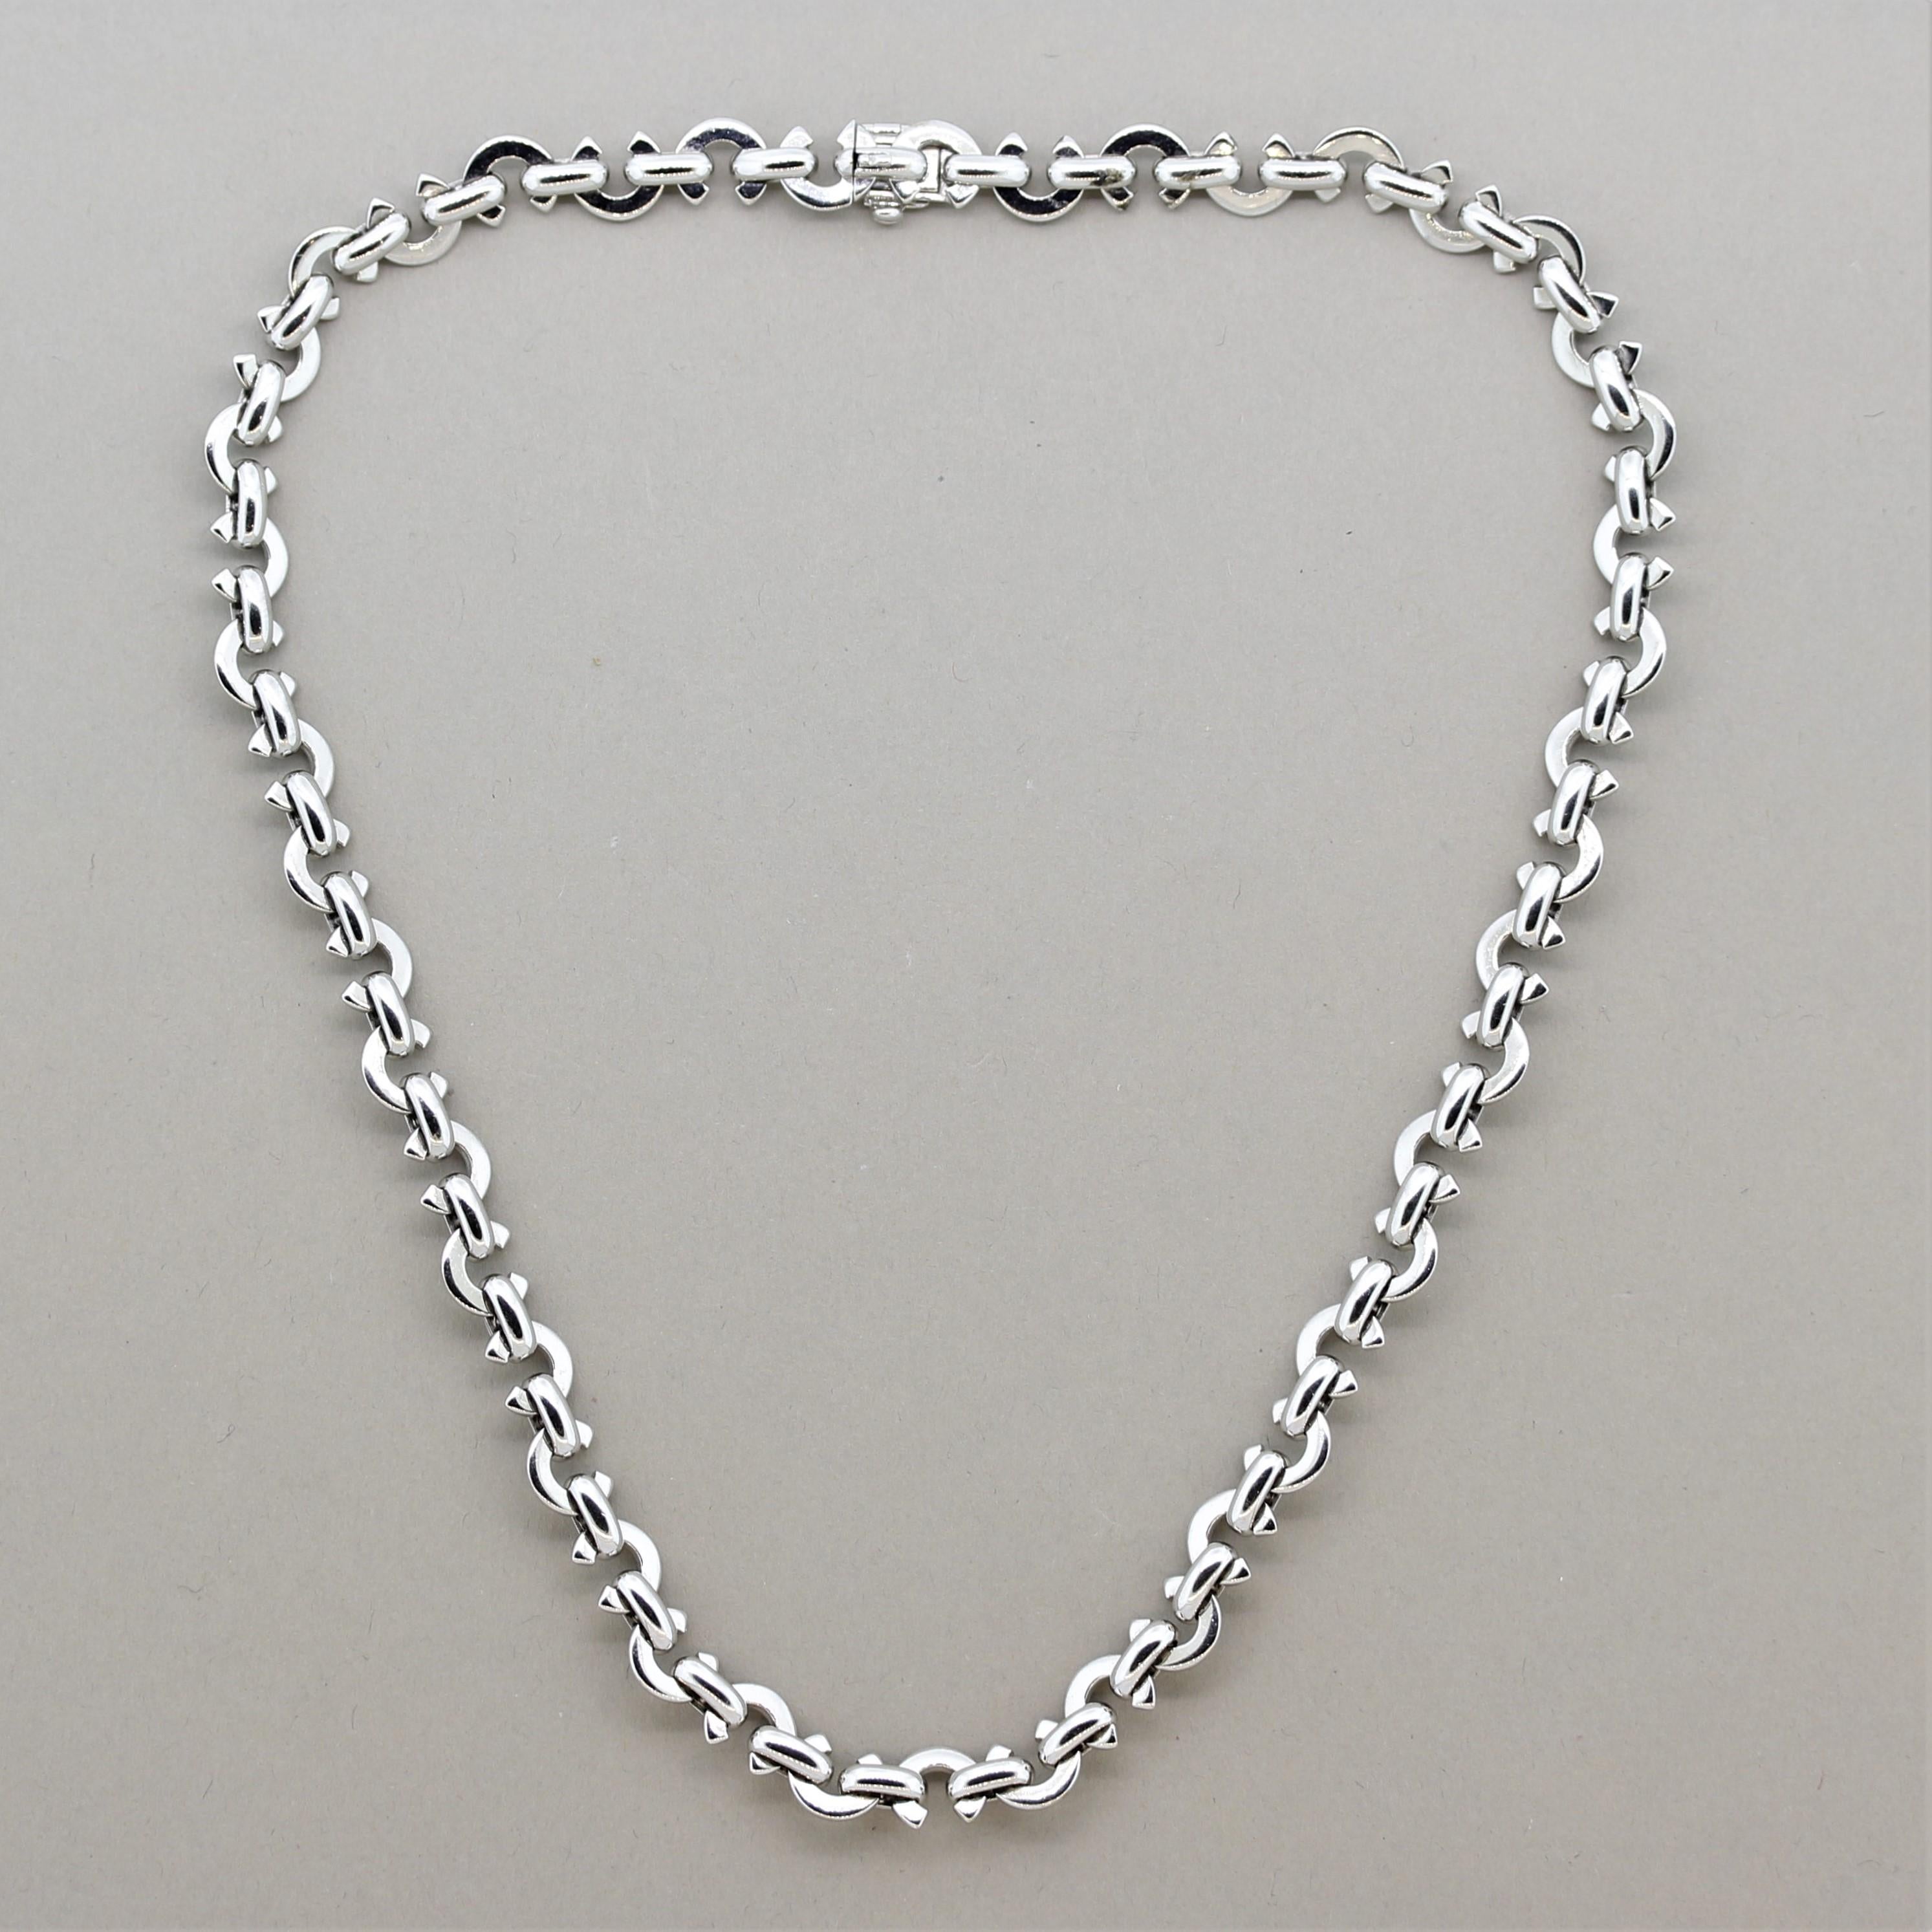 A classic “C” necklace by French designer Chanel! It is made in 18k white gold and features their logo around the entirety of the necklace. Measuring 16 inches in length, this is the perfect necklace for everyday wear.

Length: 16 inches